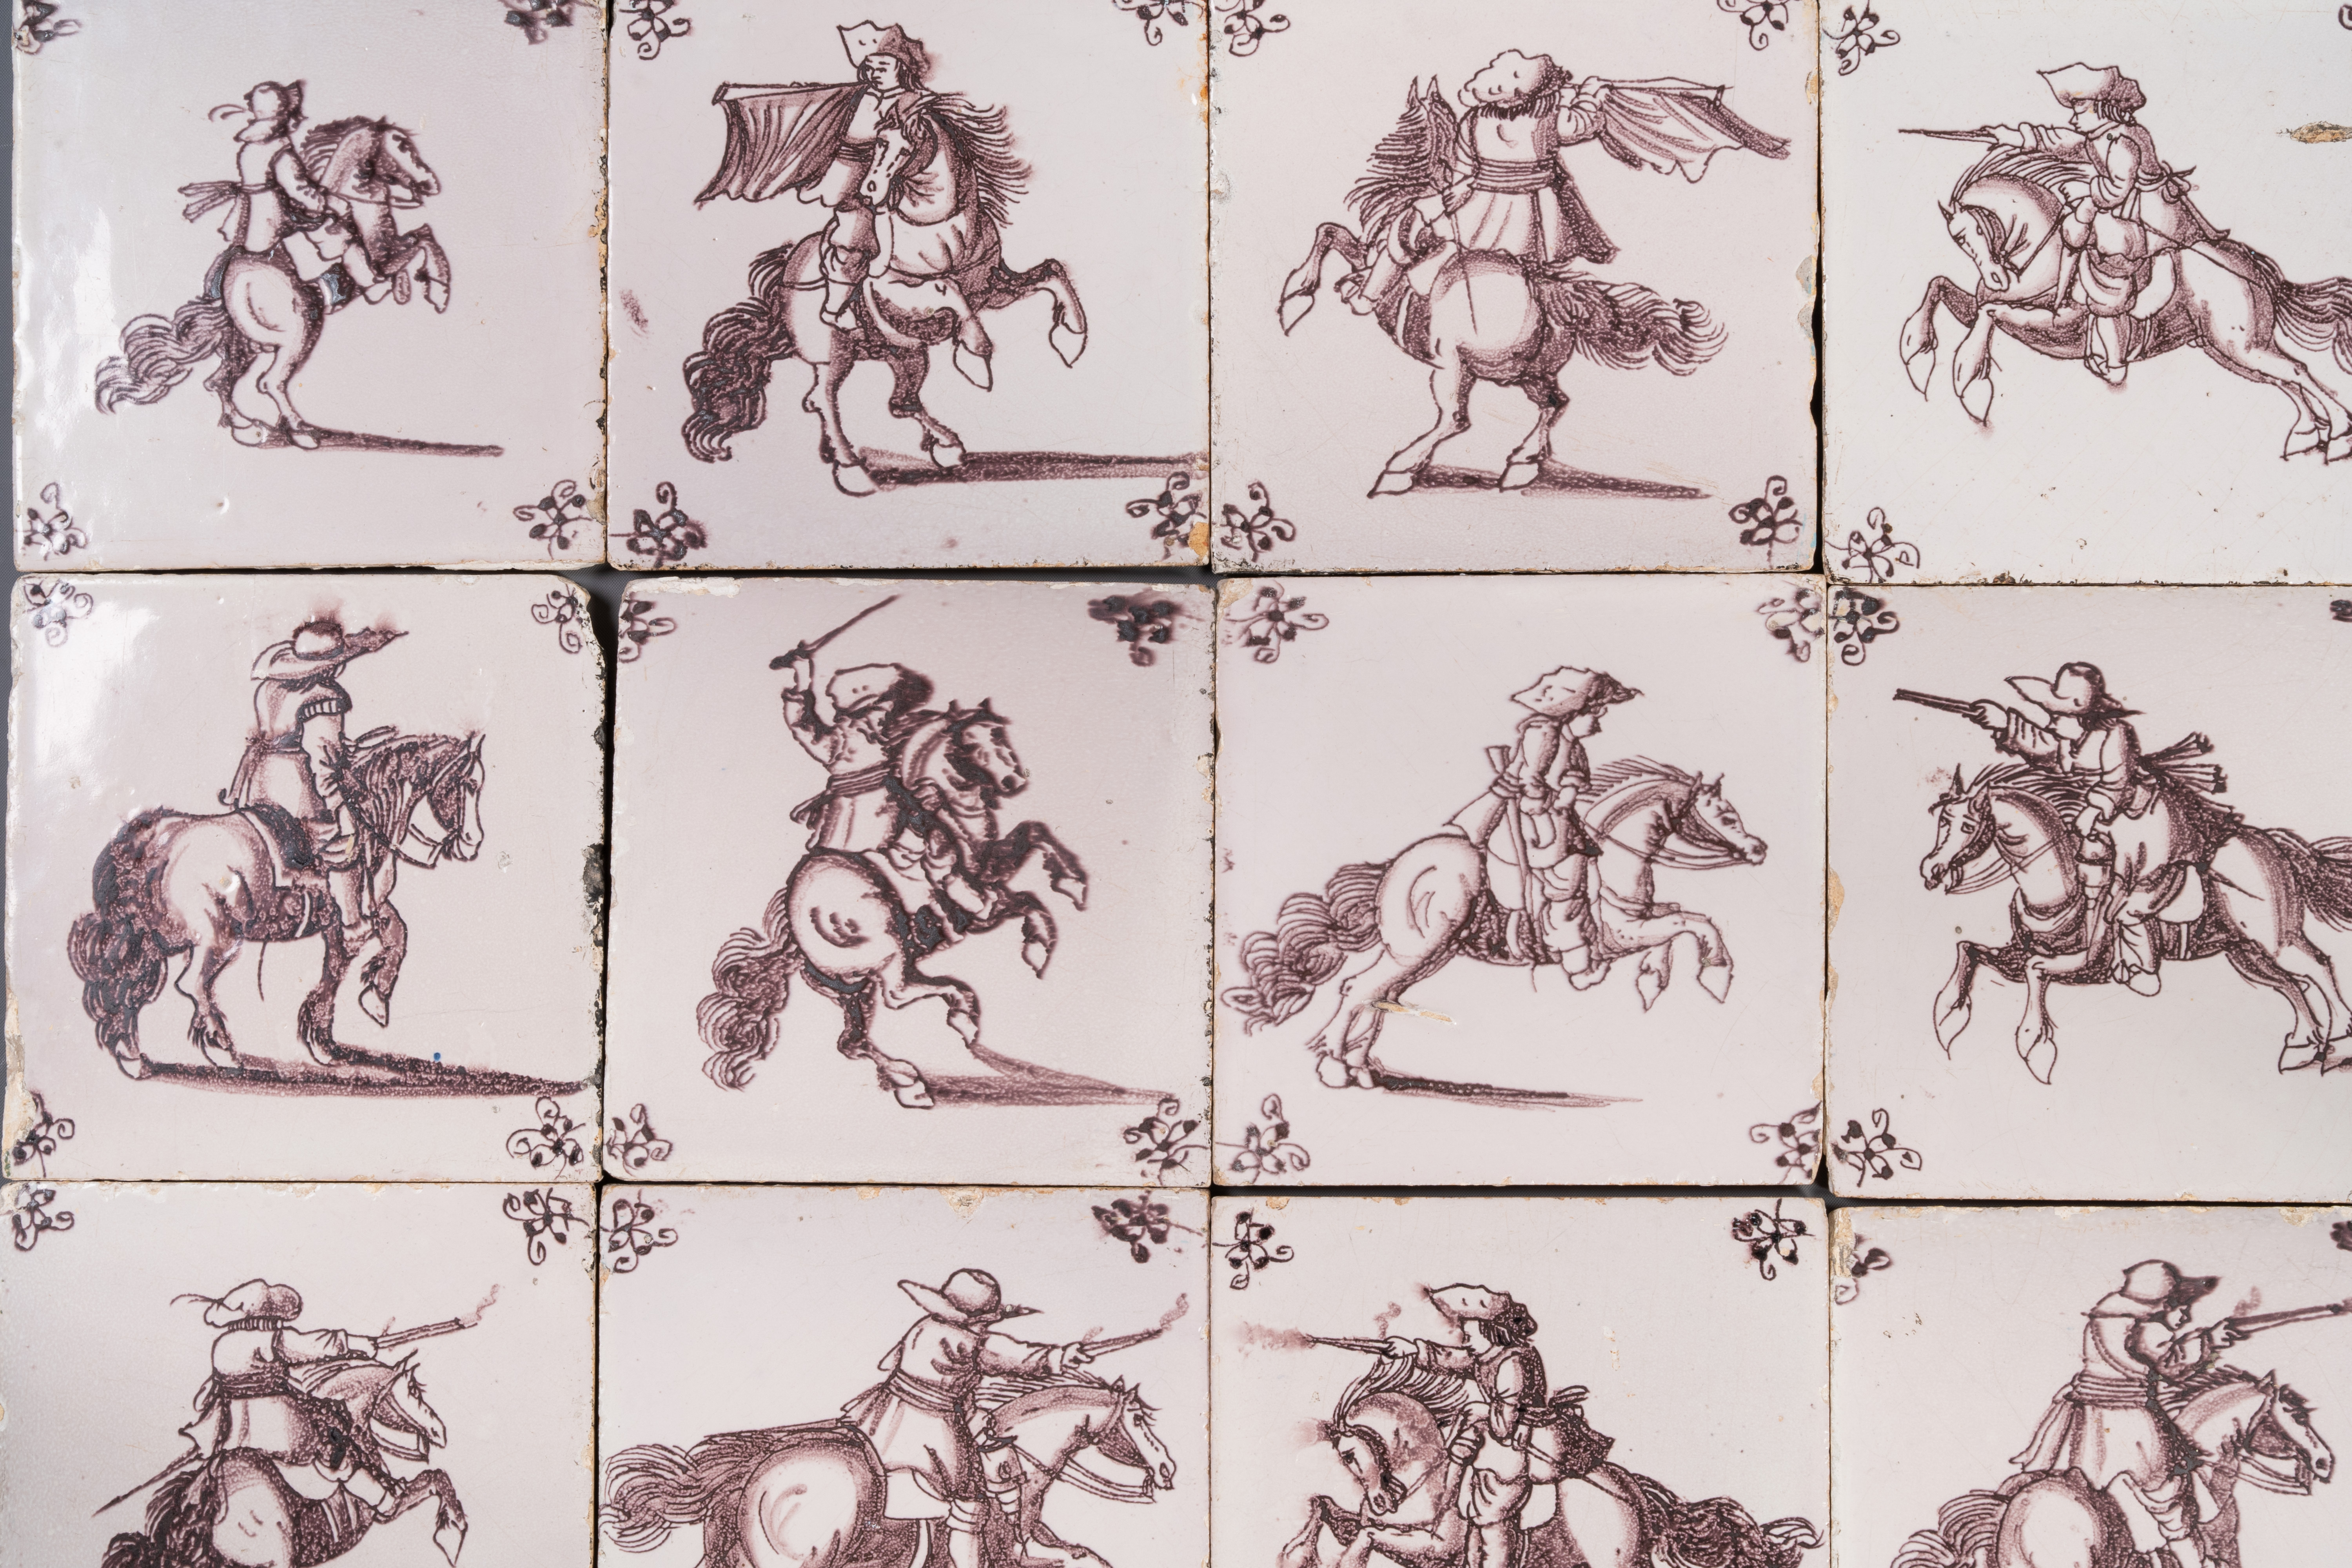 Fifteen Dutch Delft manganese tiles with horse riders, late 17th C. - Image 4 of 13